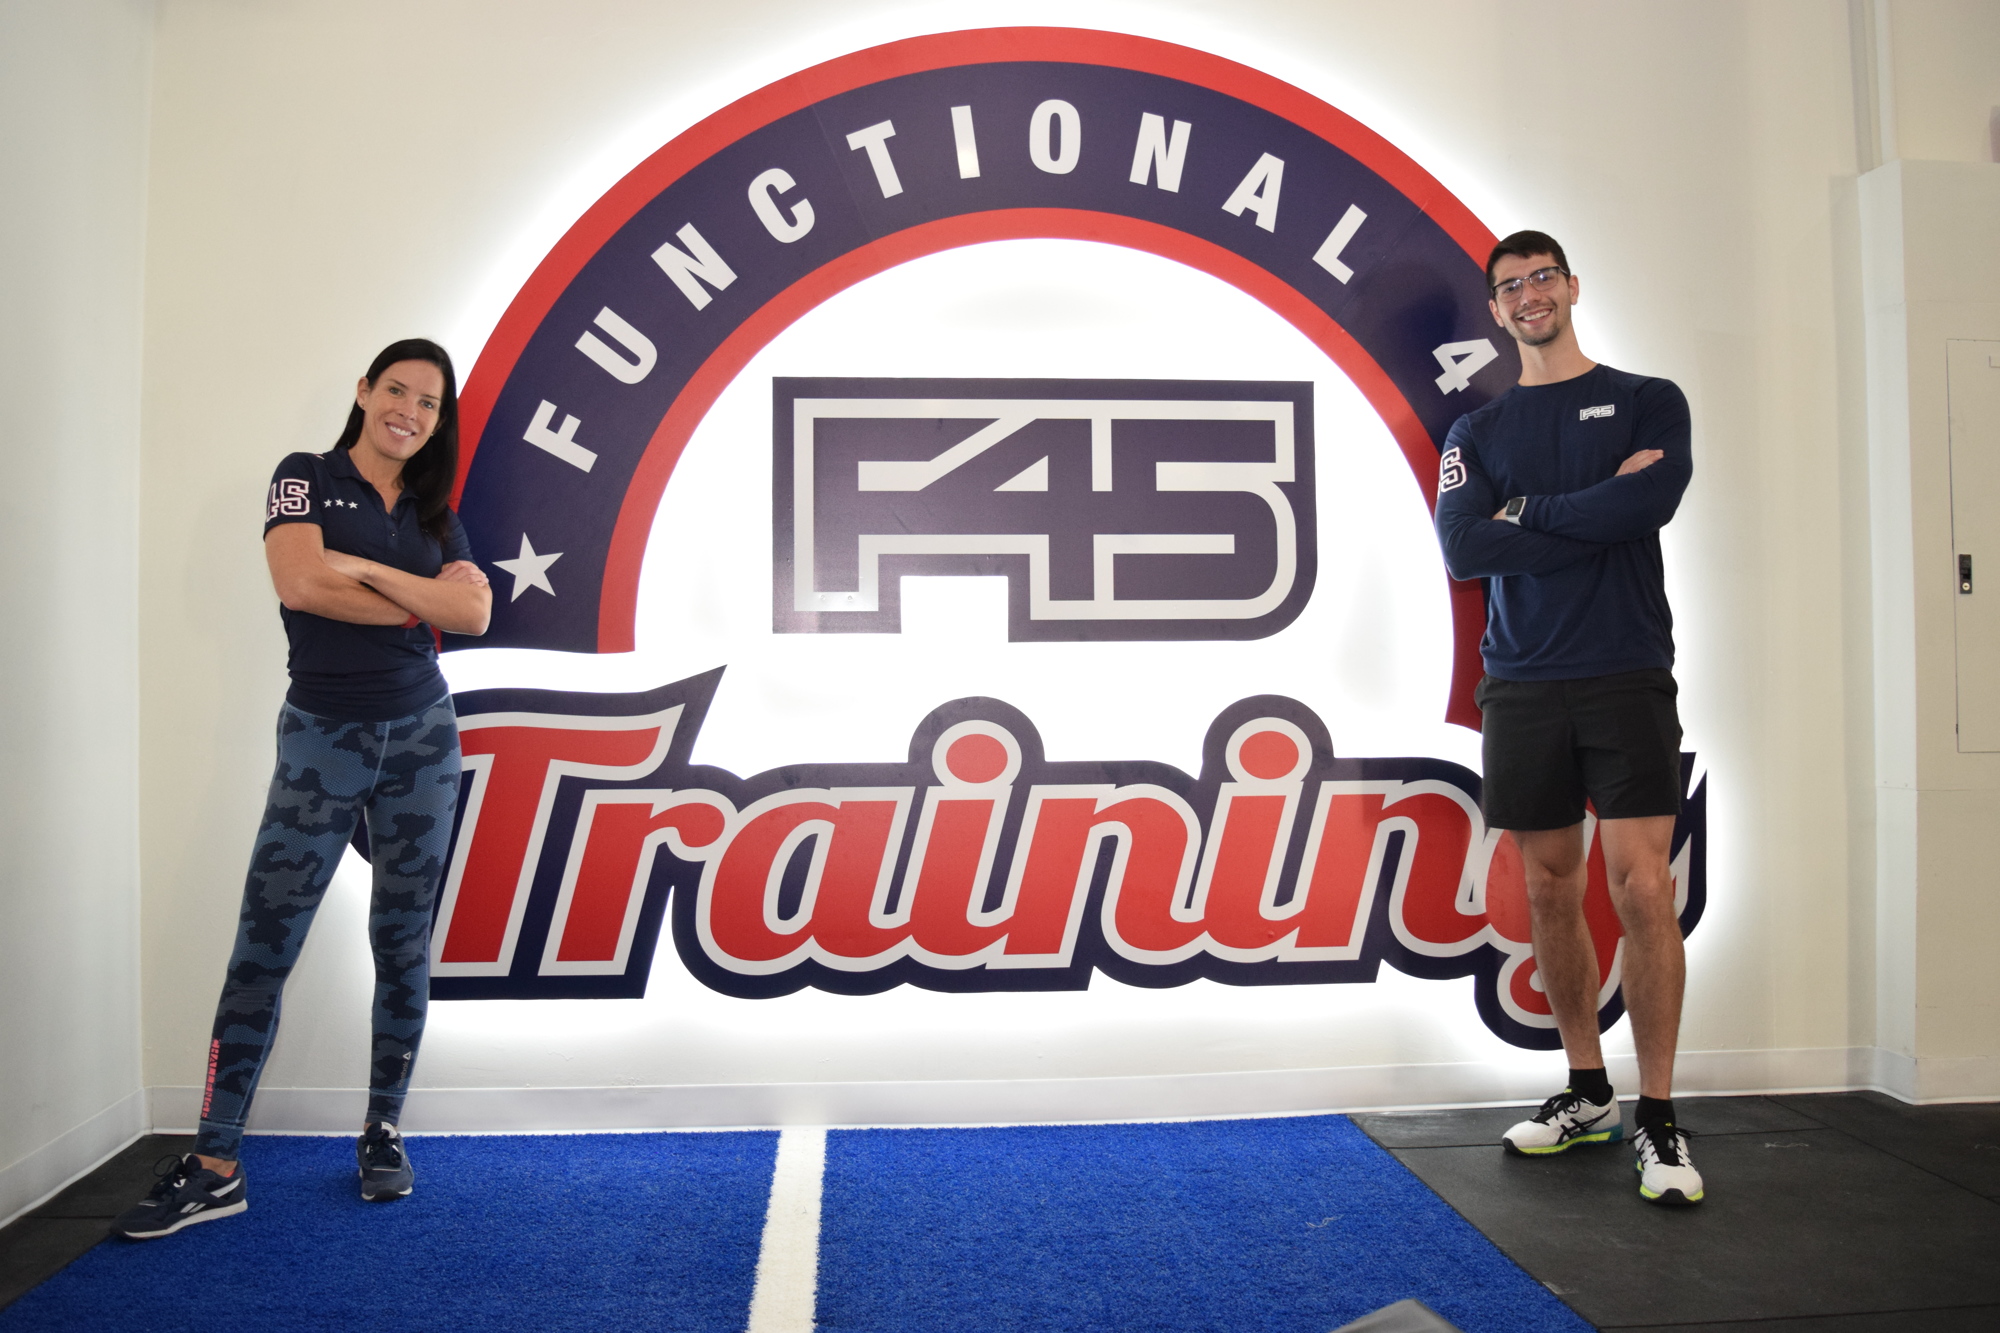 Tara Sue Gally and one of her lead trainers, Christopher Manning, were elated to open F45 Training Baldwin Park.